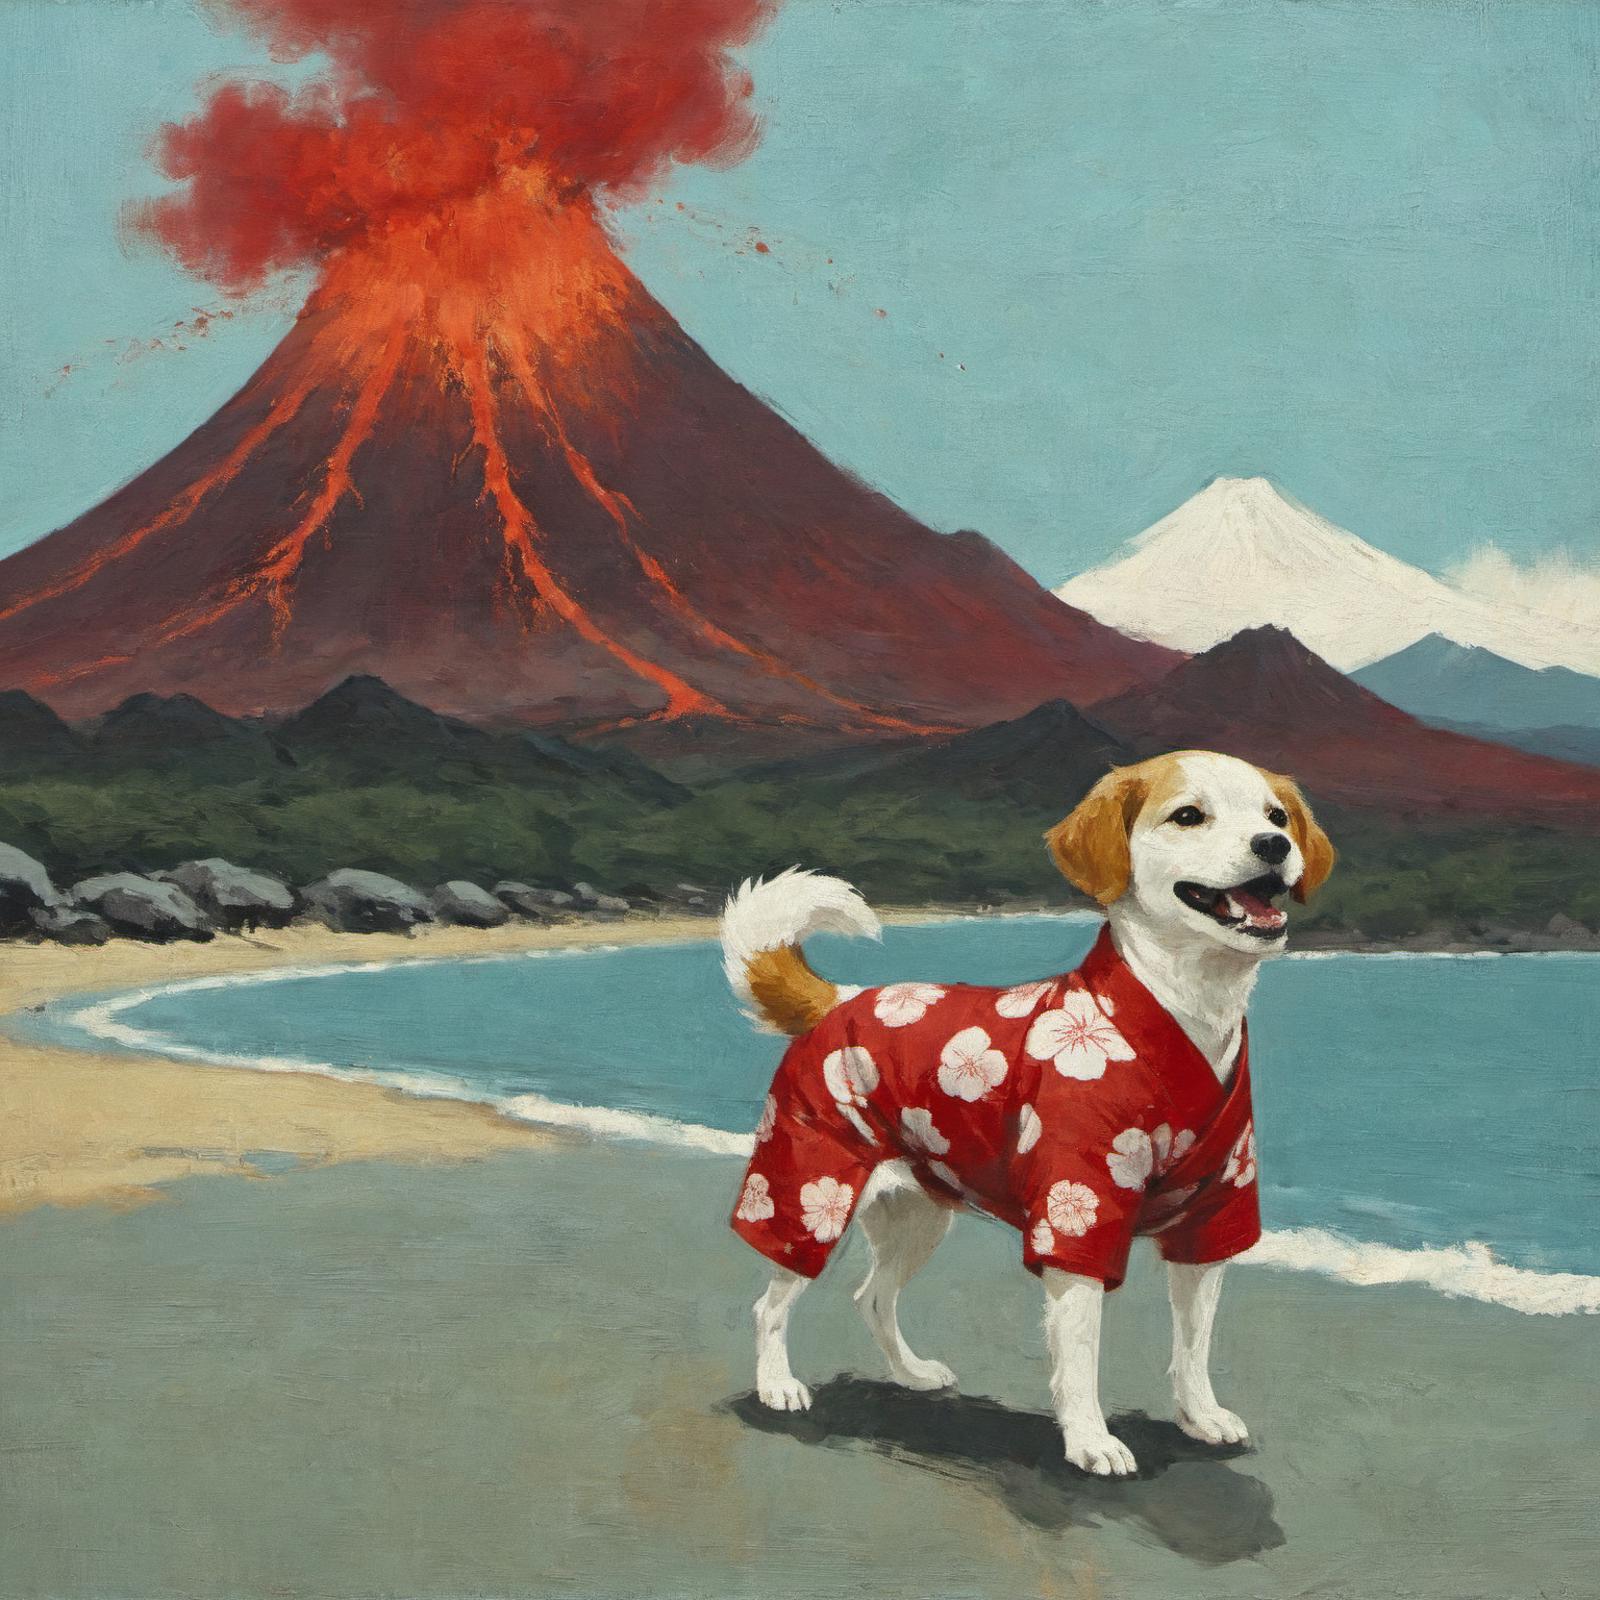 A dog wearing a red and white Hawaiian shirt stands on a beach.